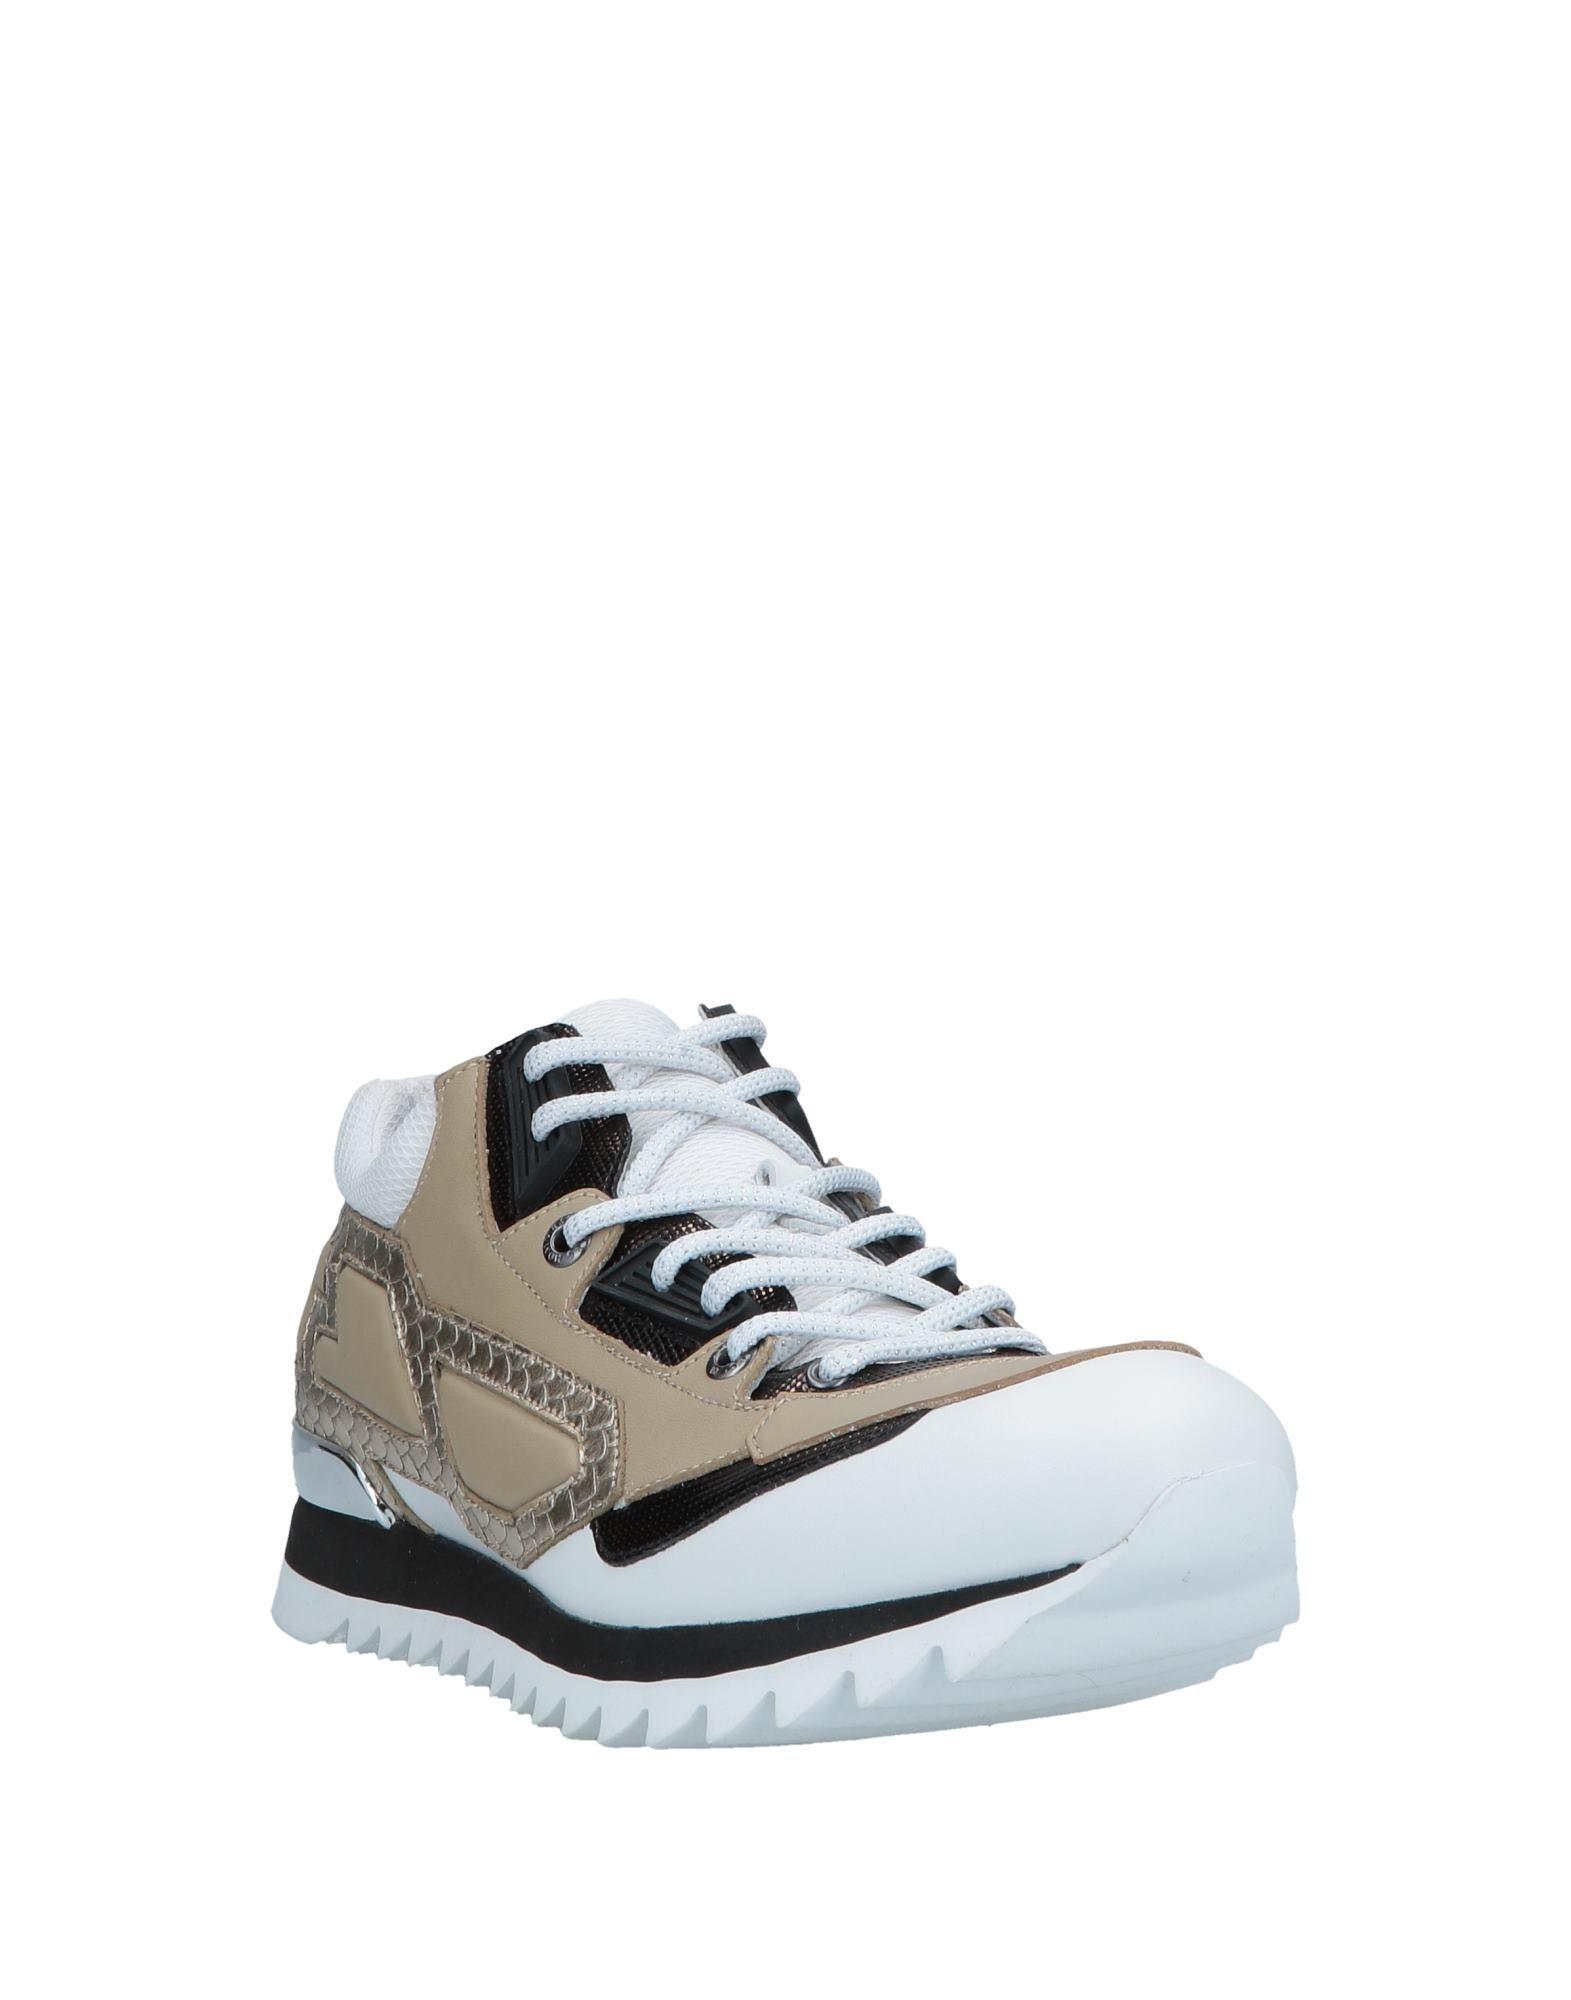 Les Hommes Leather Low-tops & Sneakers in White for Men - Lyst